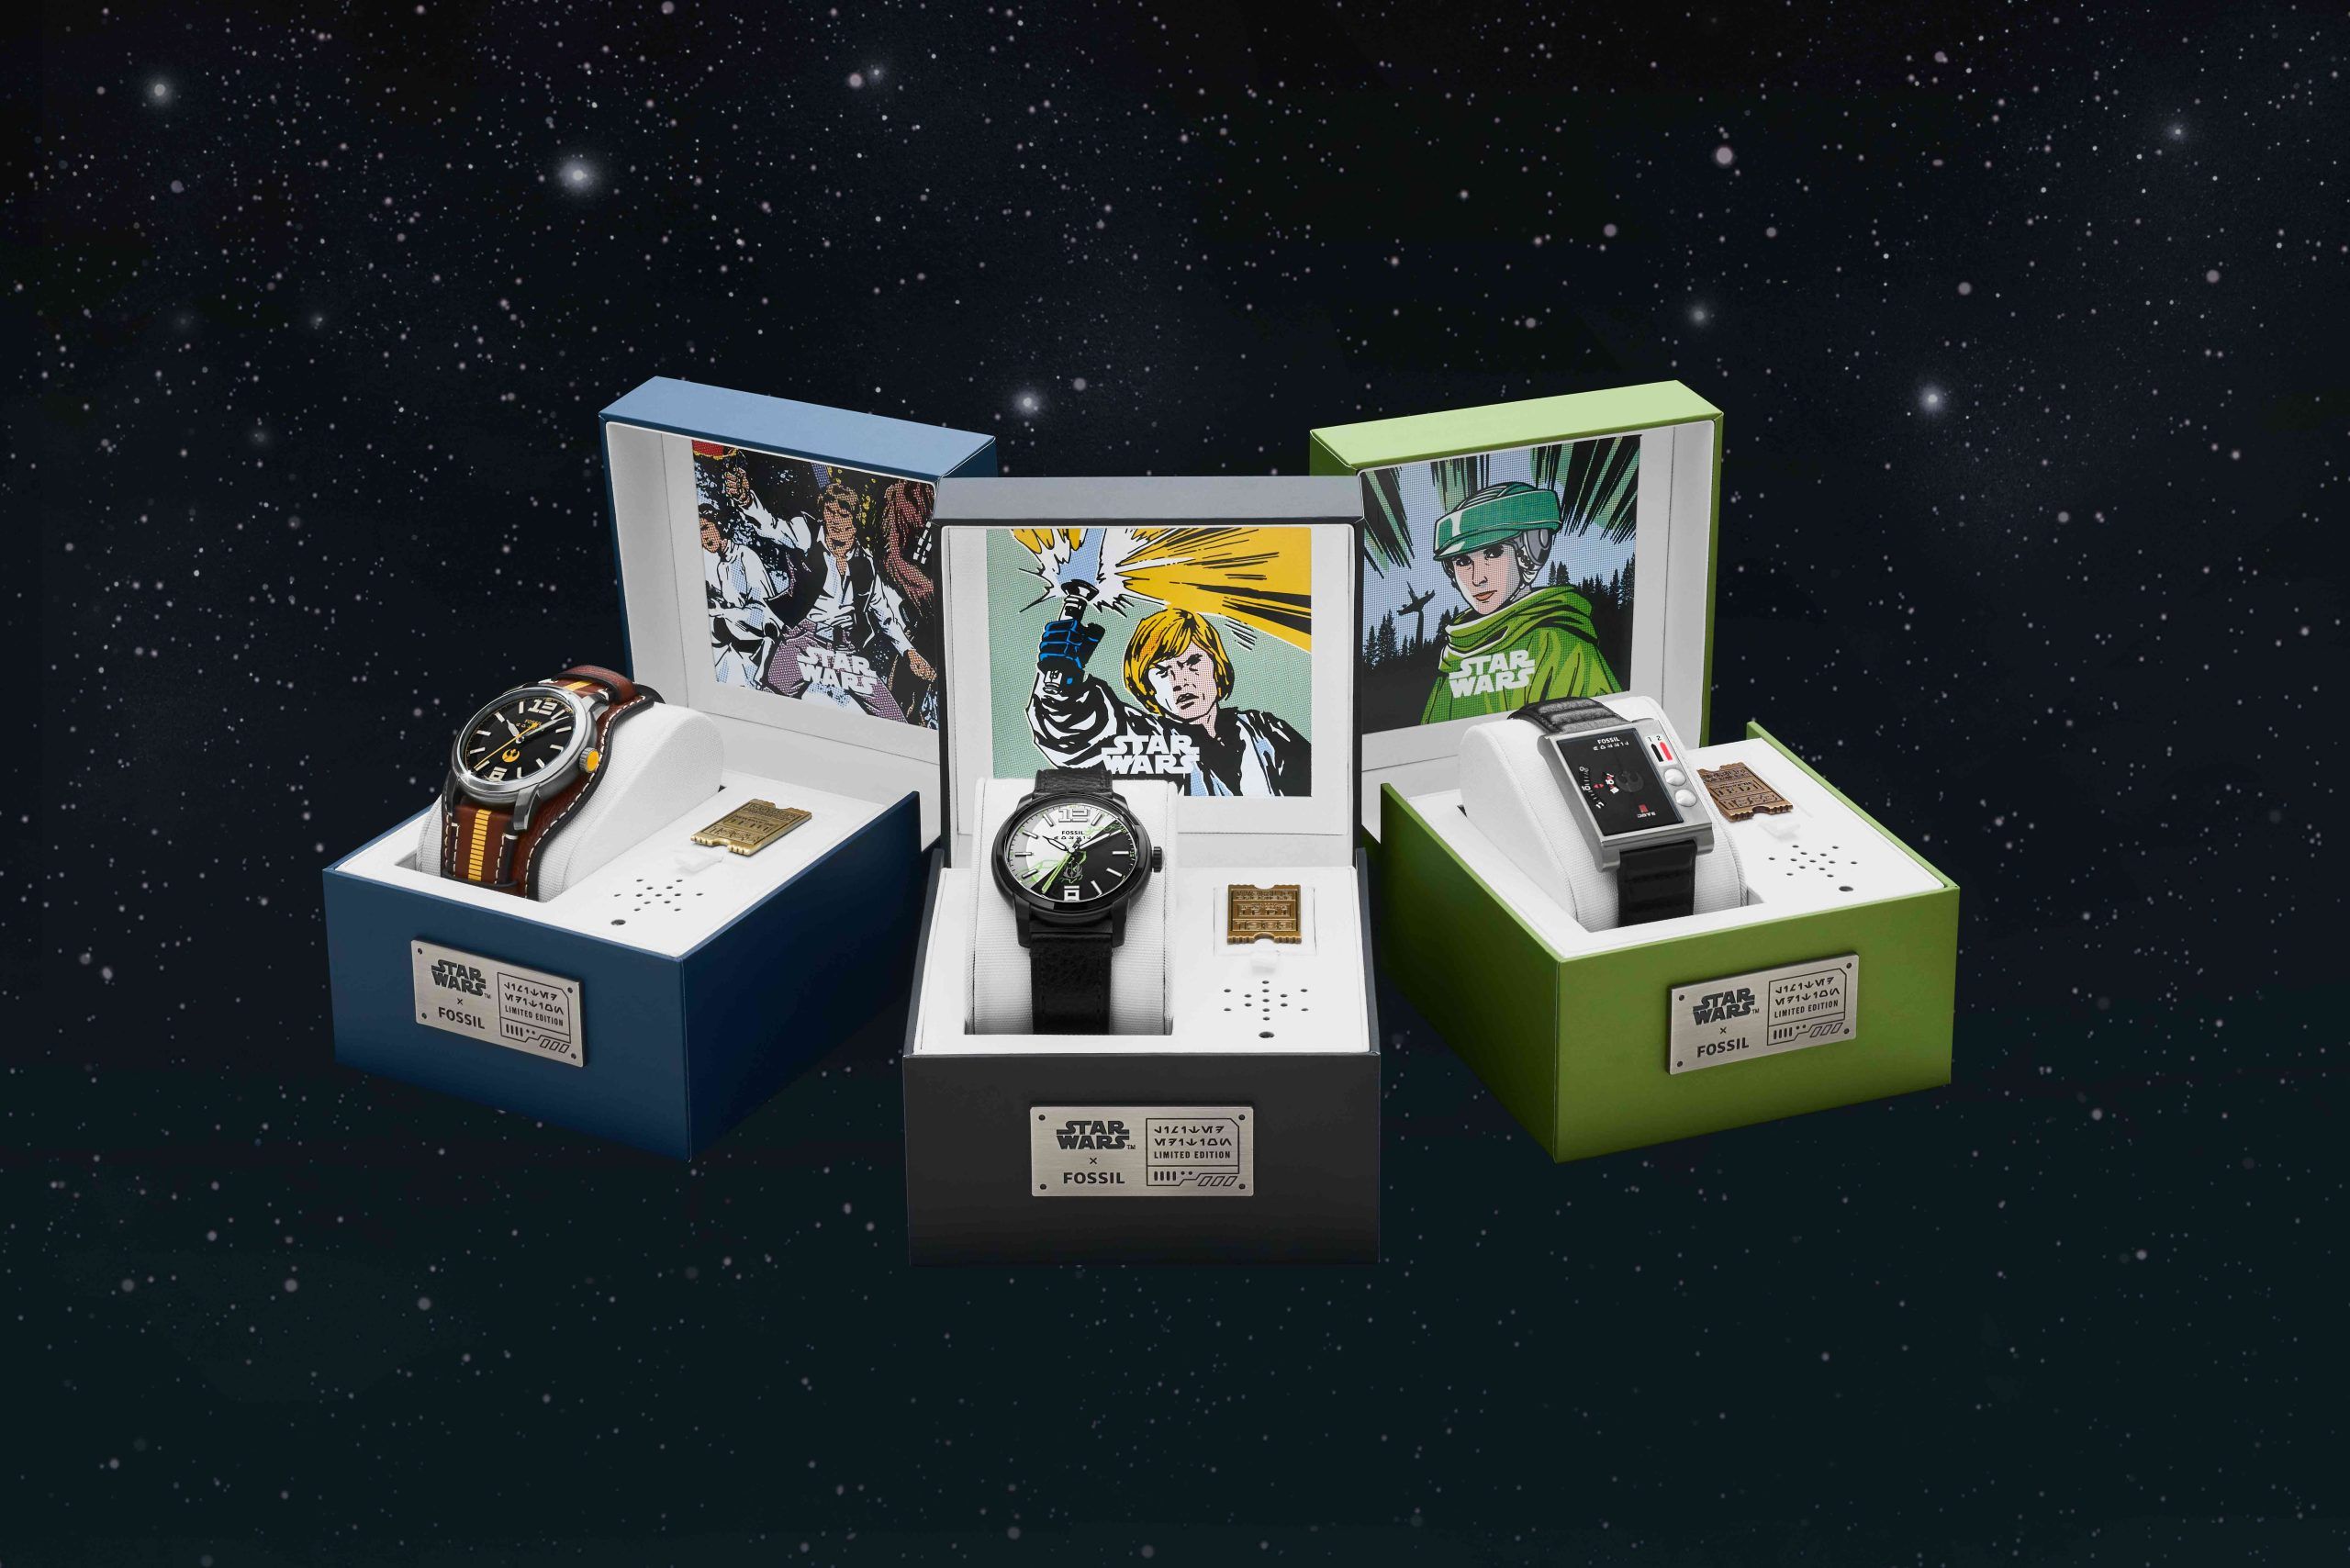 Fossil Celebrates May The 4th With New Star Wars Watches